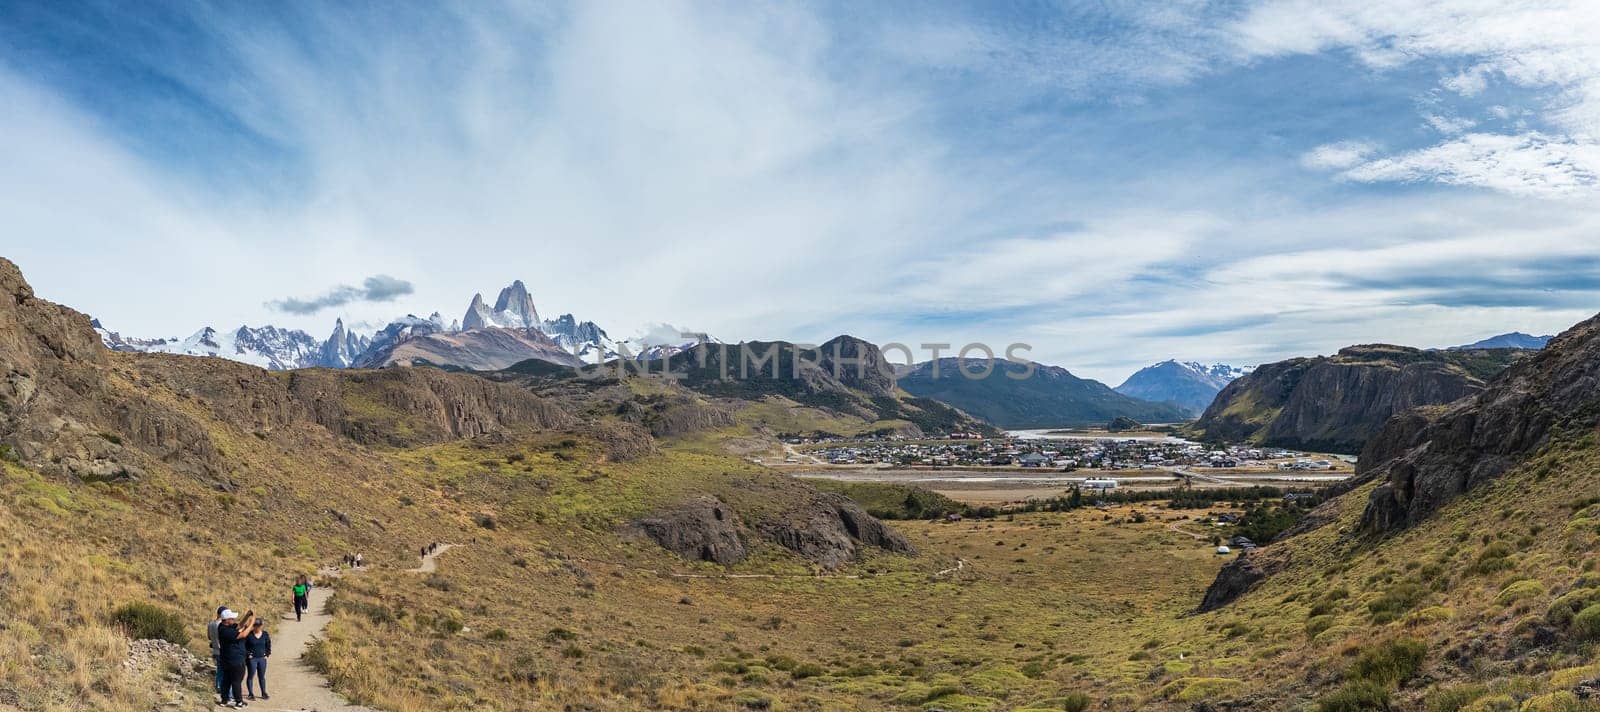 Panoramic View of a Mountainous Landscape with Hikers by FerradalFCG